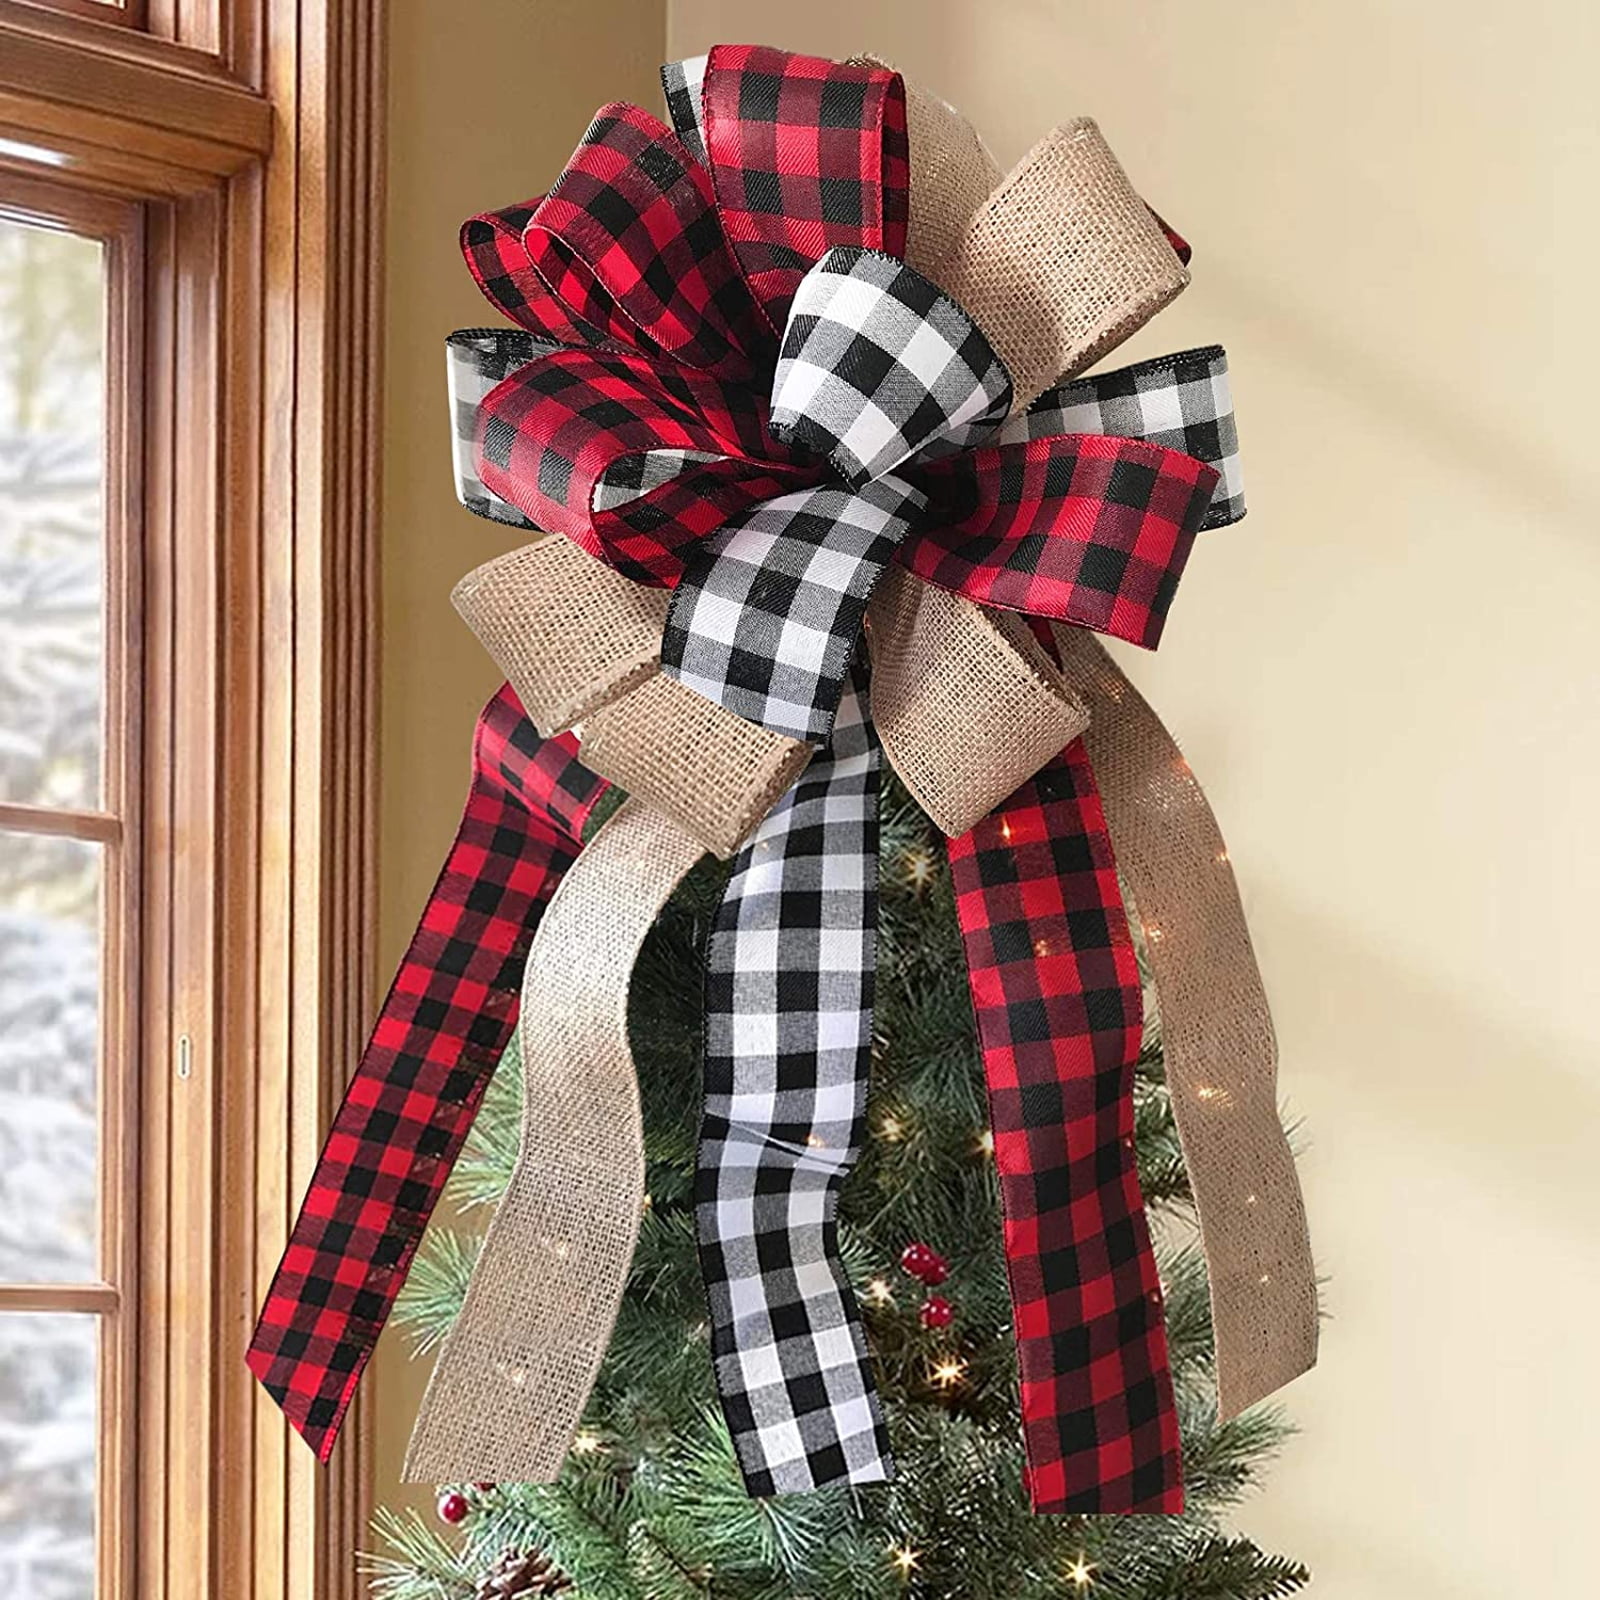 Merry Christmas Hanging Wall Plaque Decoration Hearts Trees Stars Gingham Bows 